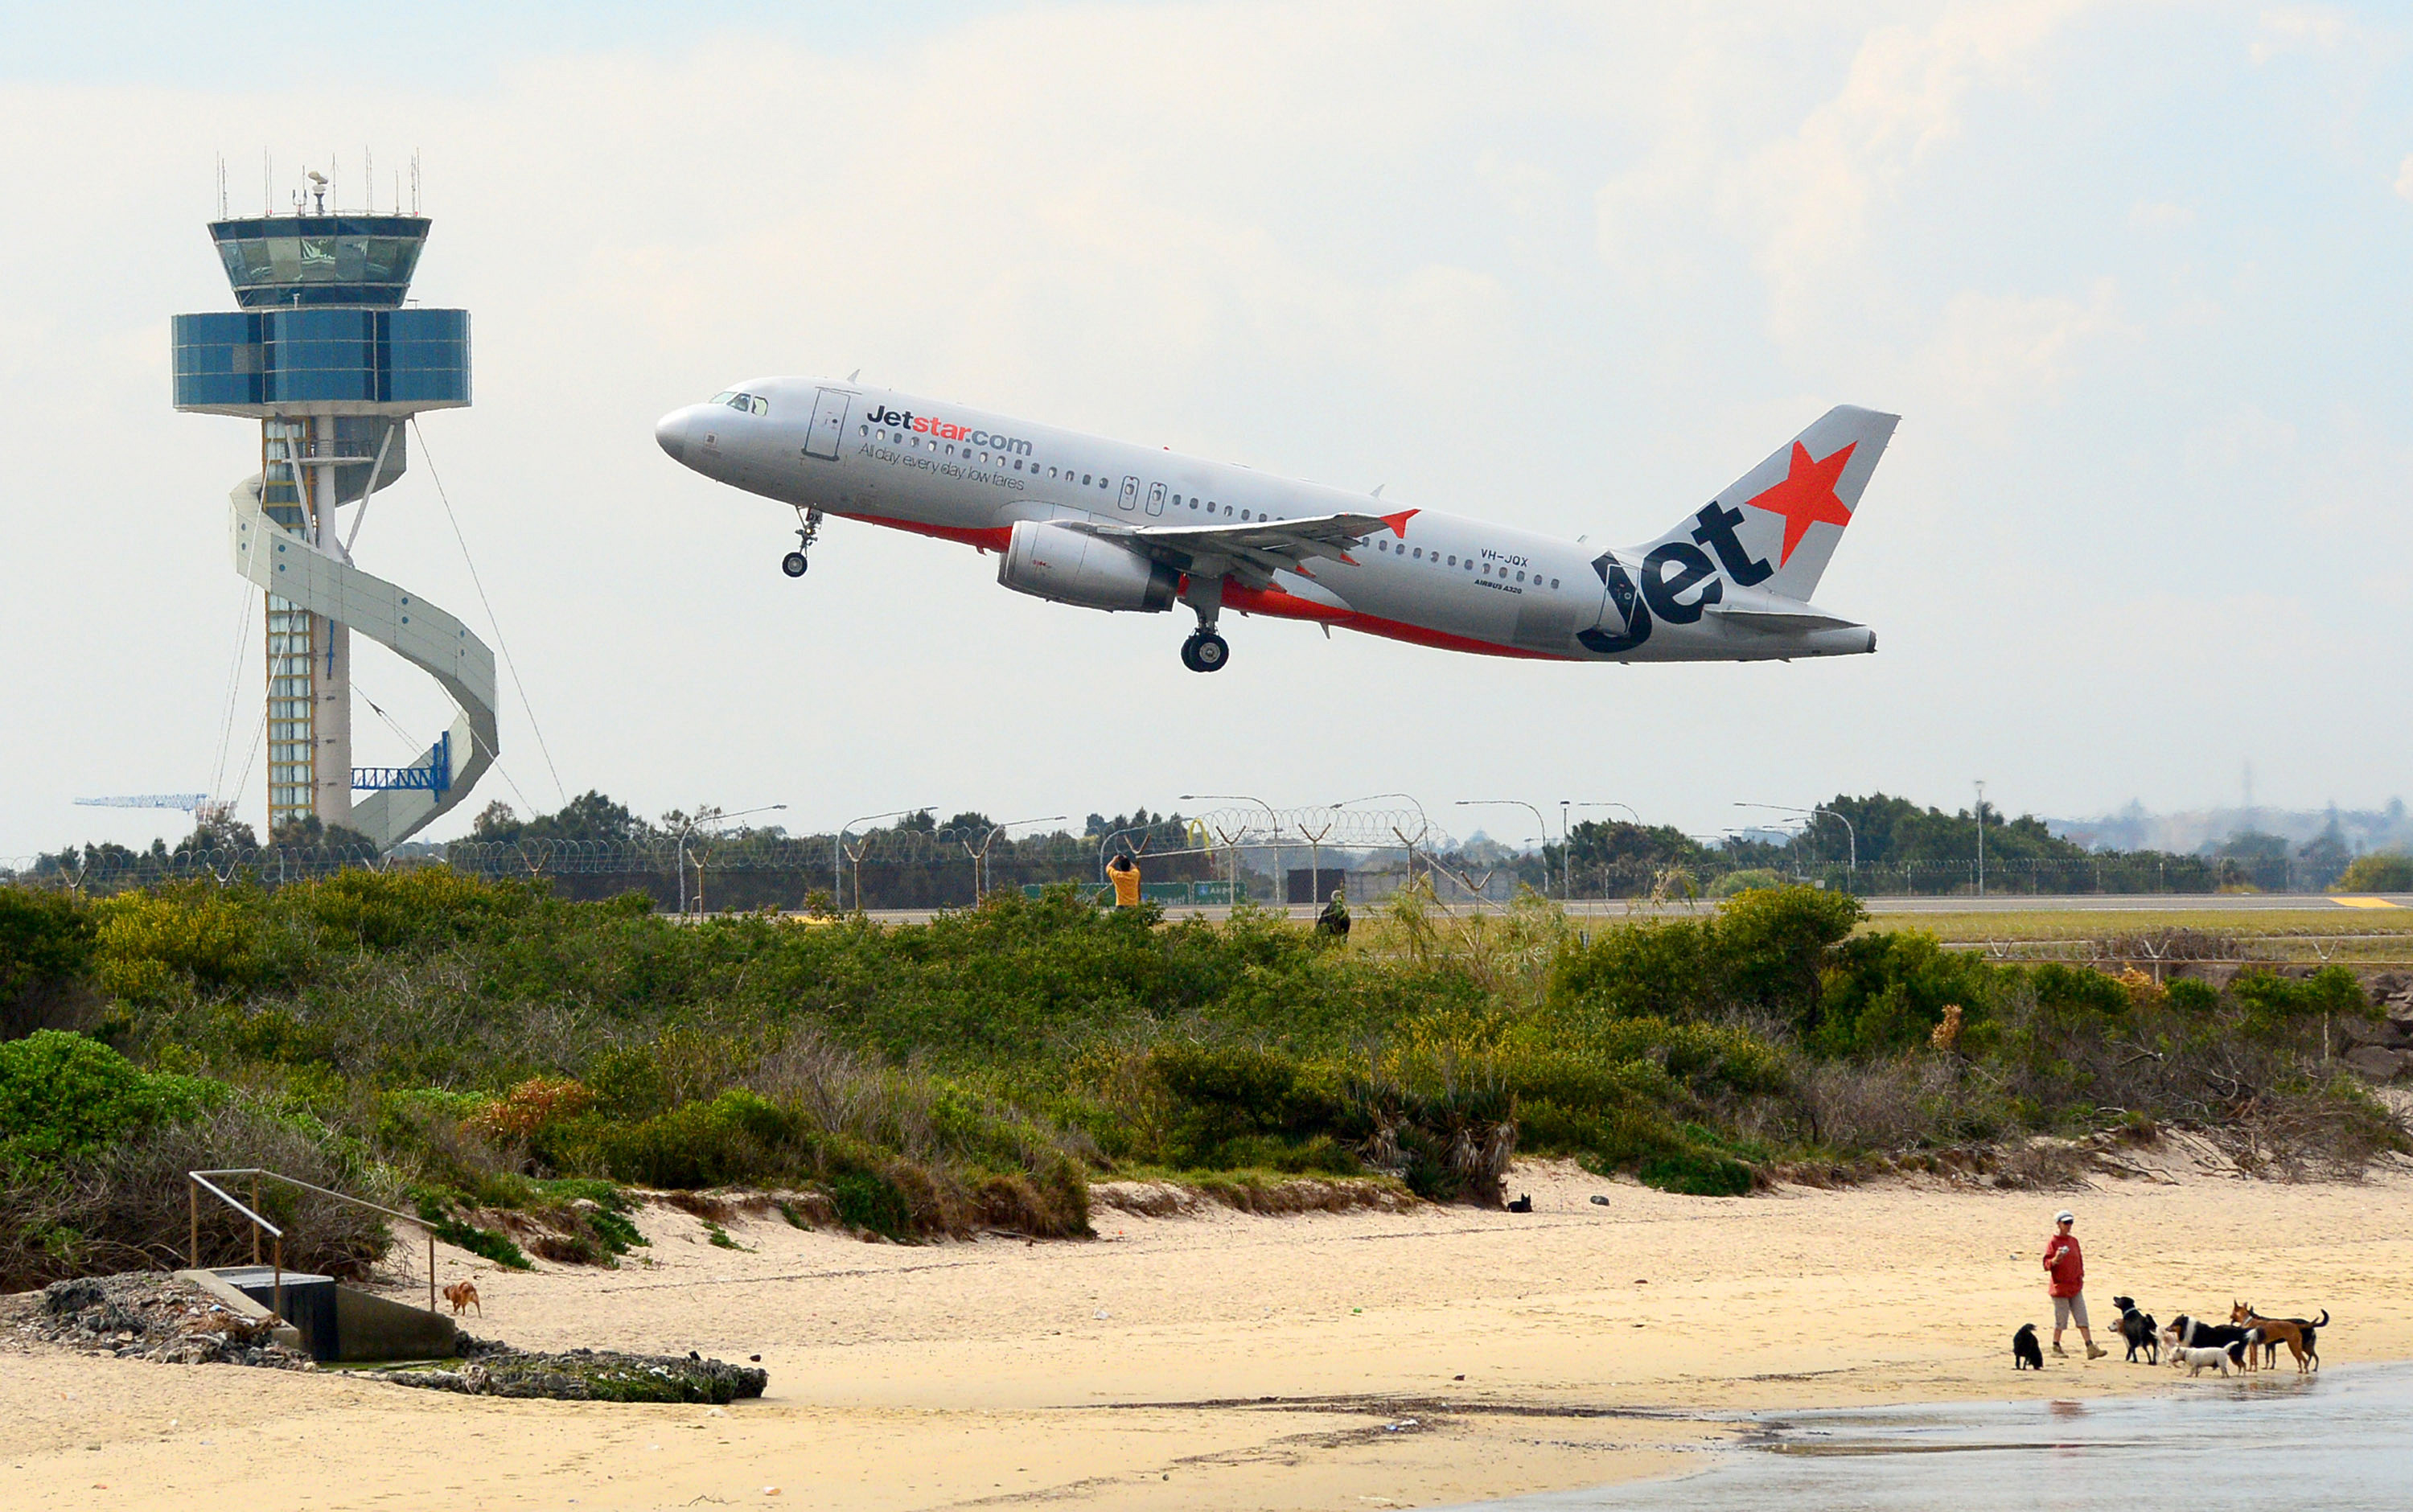 A Jetstar plane leaves Kingsford Smith Airport in Sydney on Aug. 29, 2013 (Jeremy Piper—Bloomberg via Getty Images)